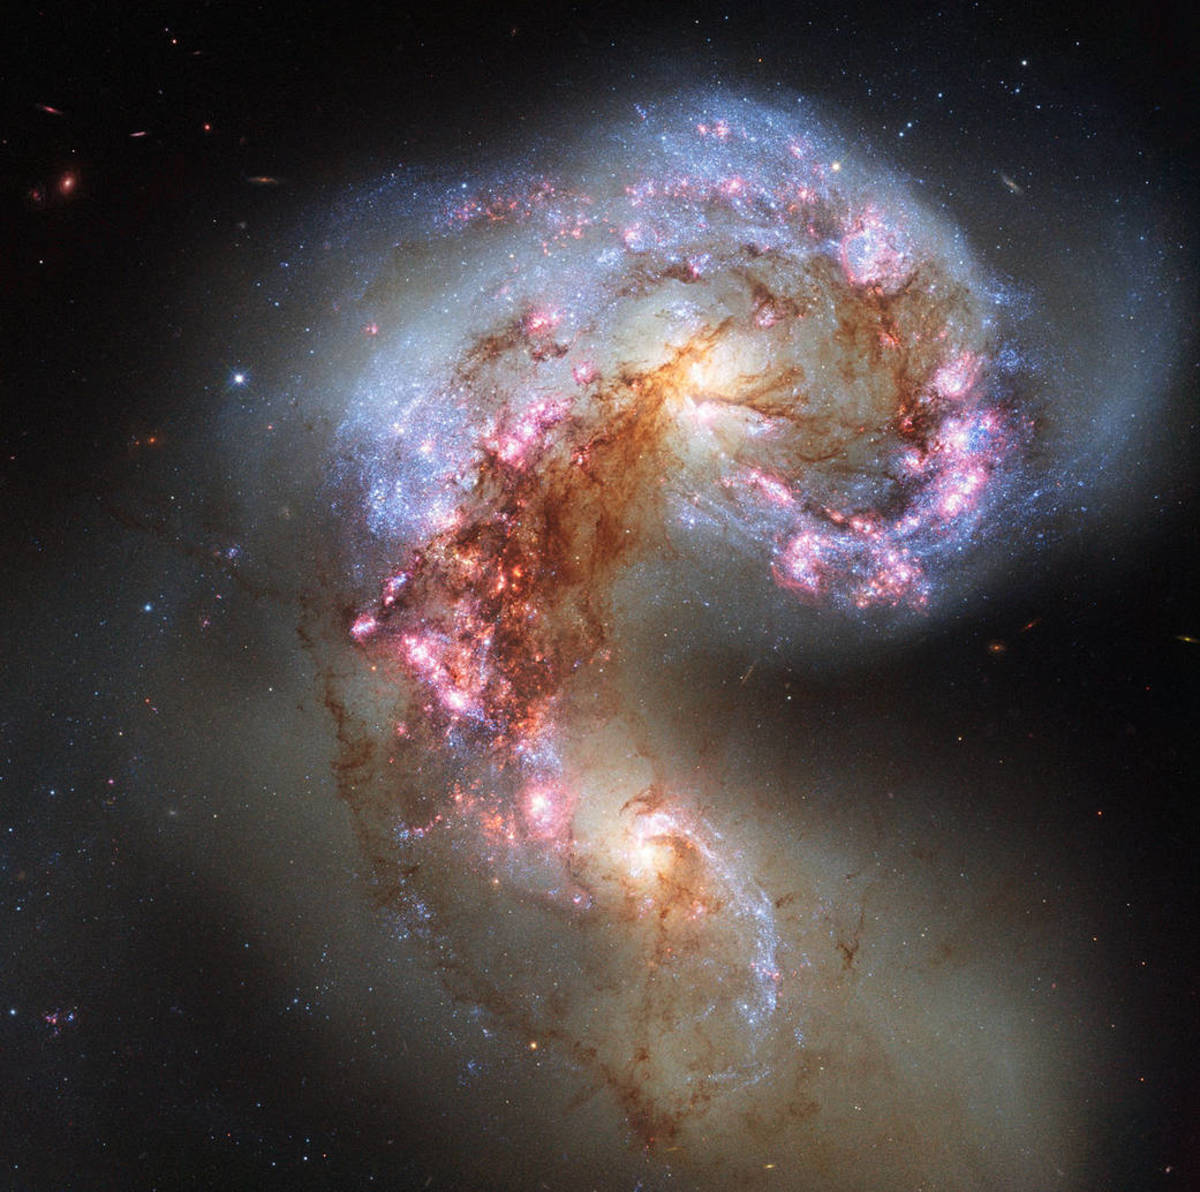 The NASA/ESA Hubble Space Telescope has snapped the best ever image of the Antennae Galaxies. Hubble has released images of these stunning galaxies twice before, once using observations from its Wide Field and Planetary Camera 2 (WFPC2) in 1997, and 